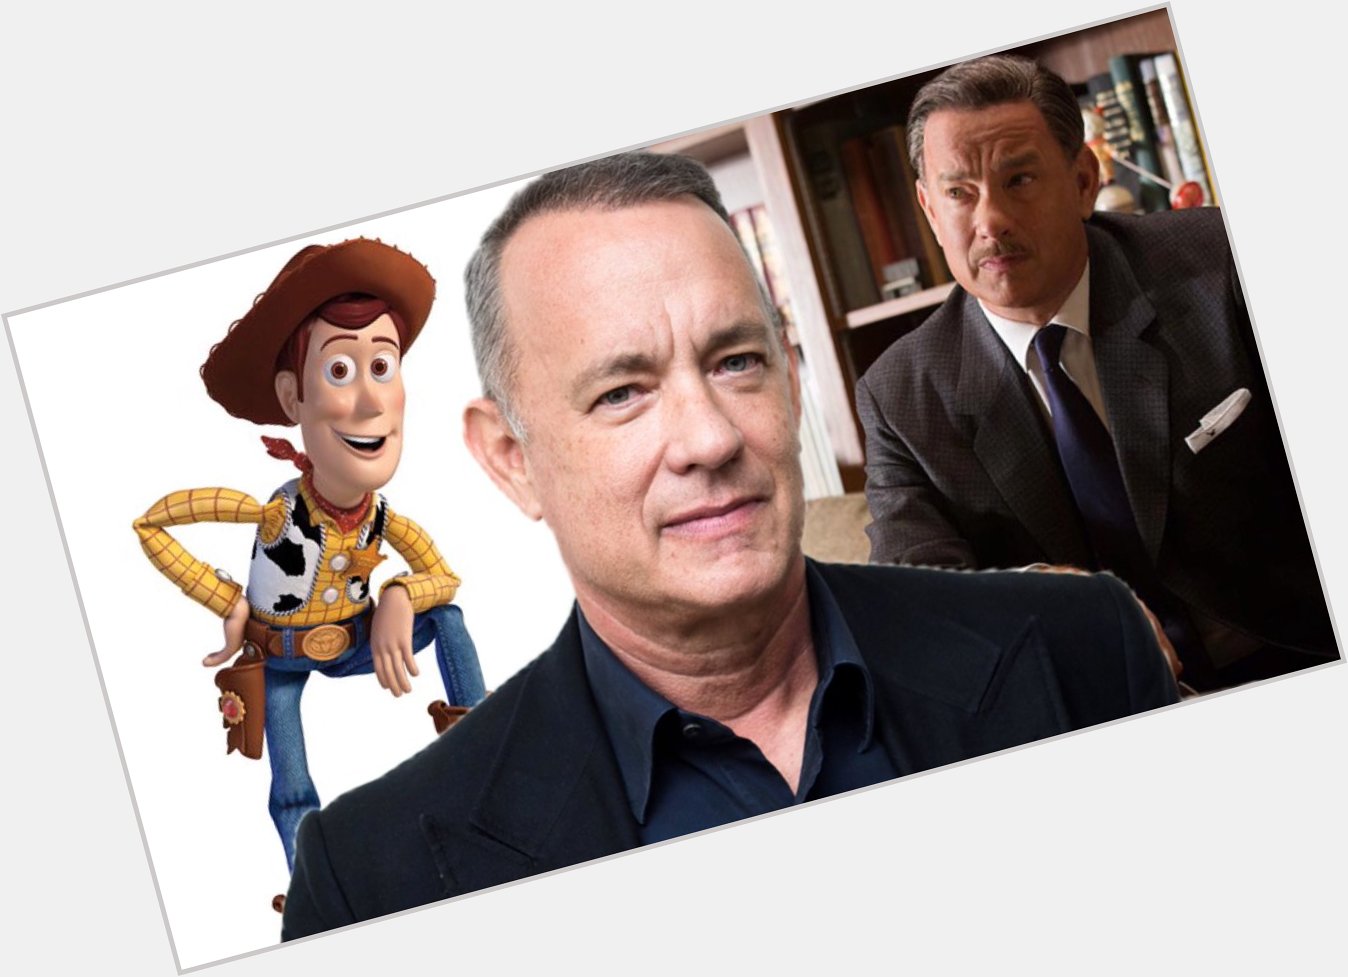 Happy birthday to the man who voiced Sheriff Woody and portrayed Walt Disney.

The great Tom Hanks. 